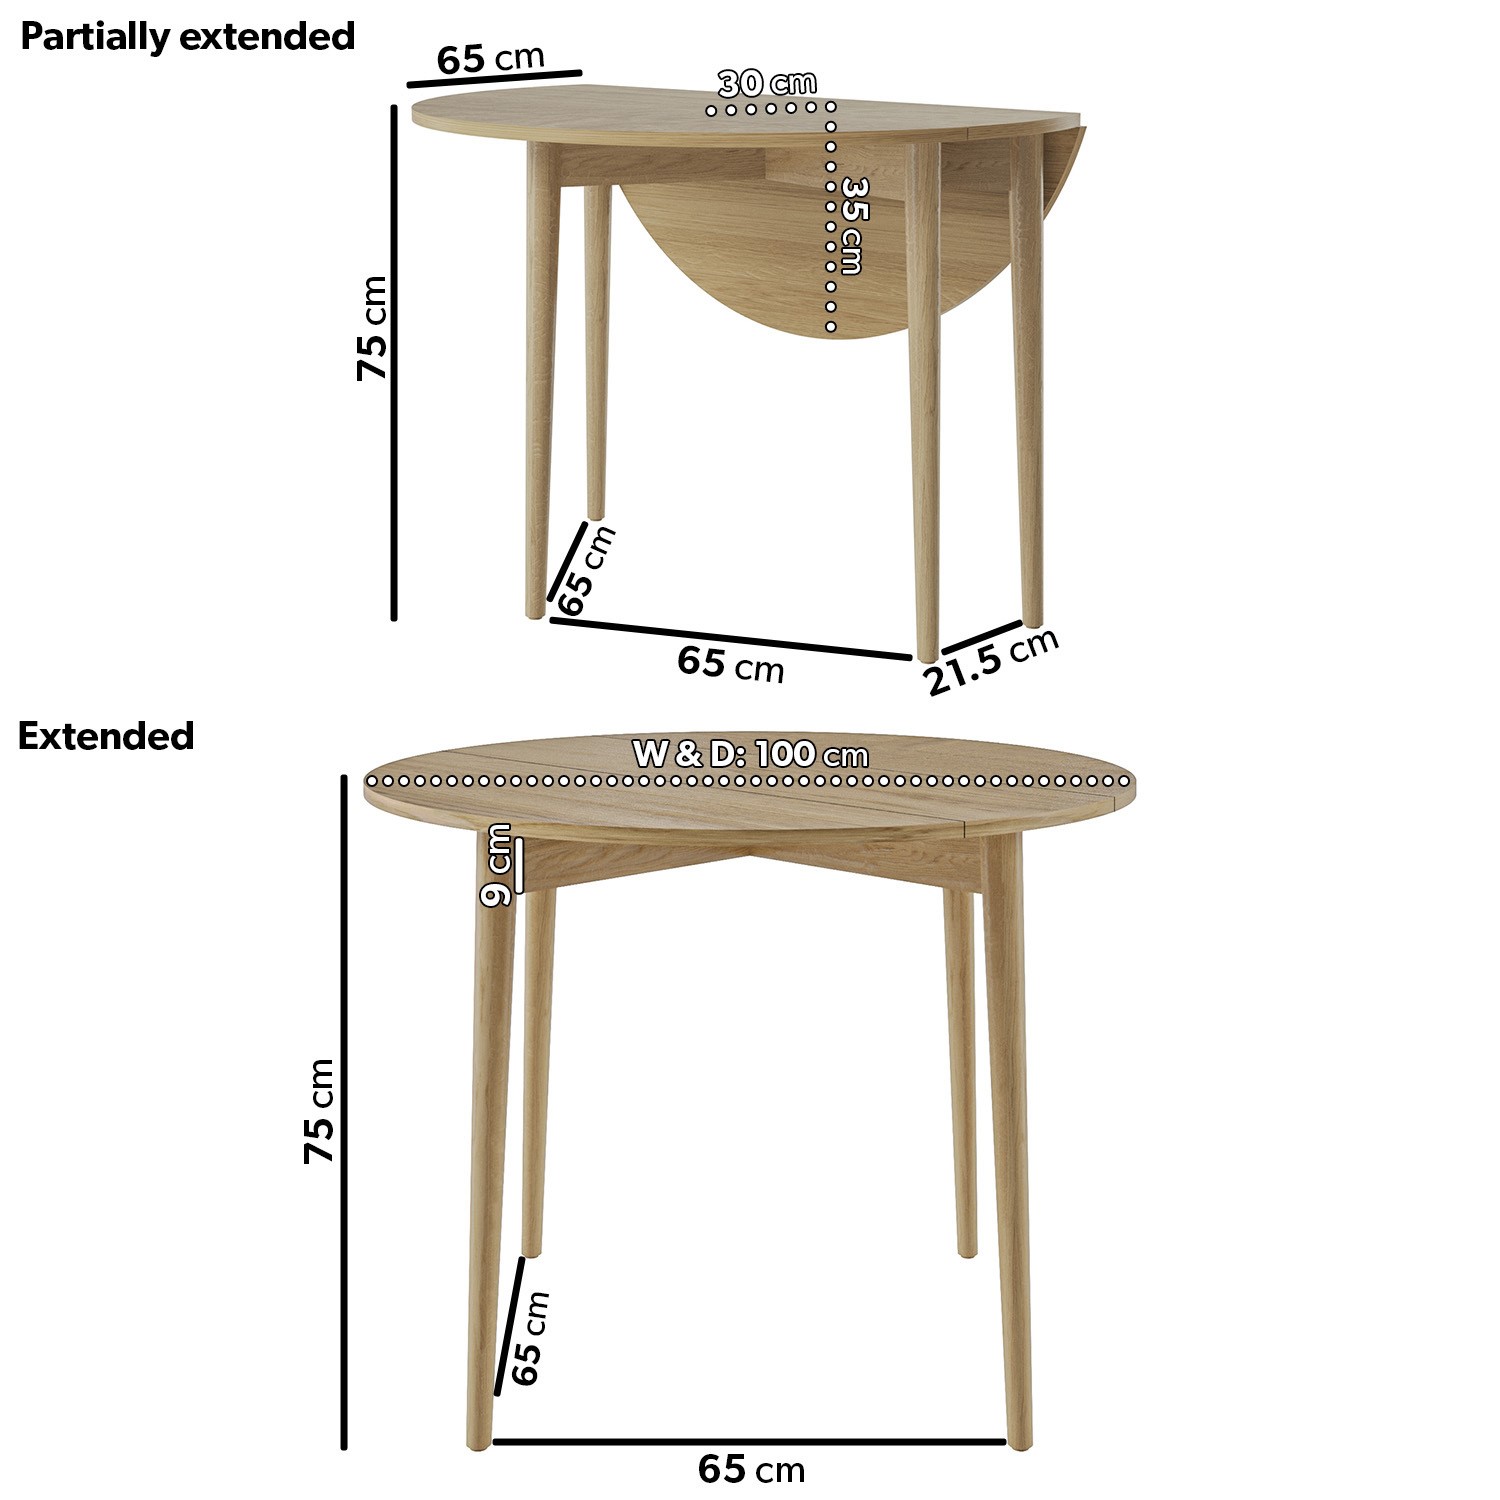 Read more about Small round oak folding drop leaf dining table seats 2-4 rudy